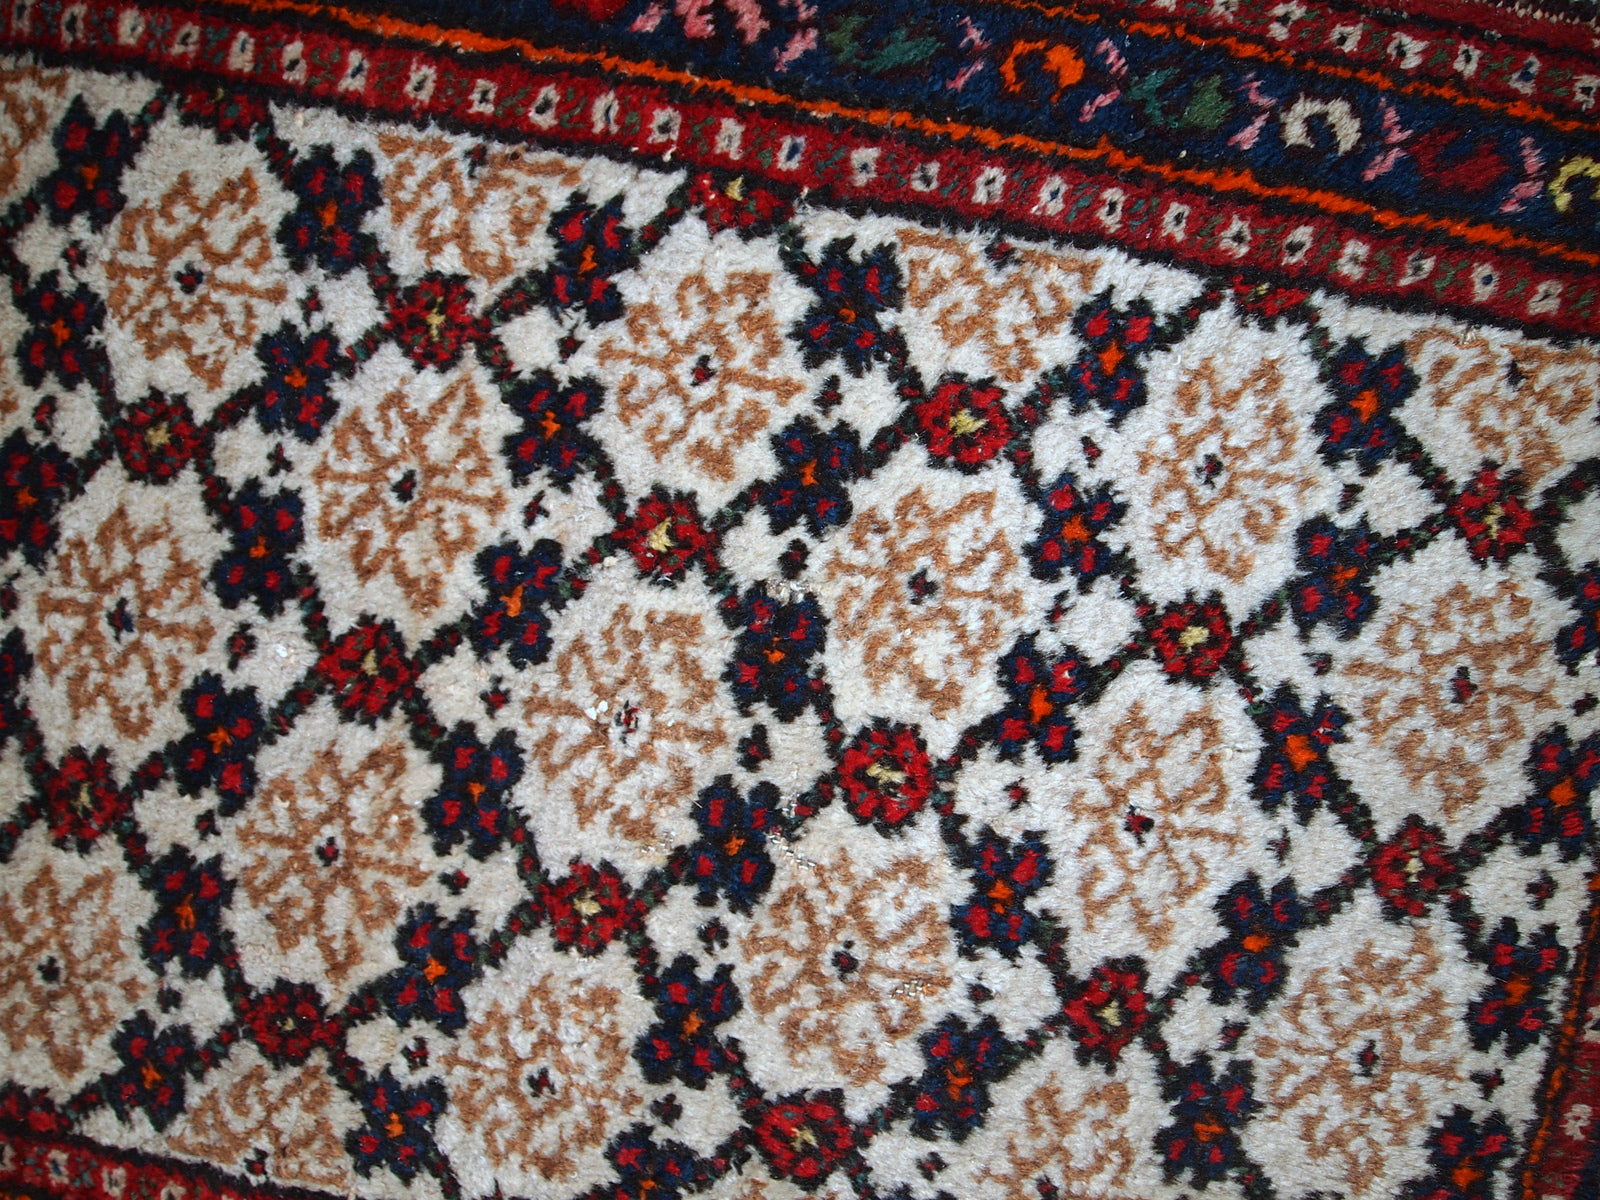 Antique Hamadan runner in good original condition. The rug is in white, red and blue shades.